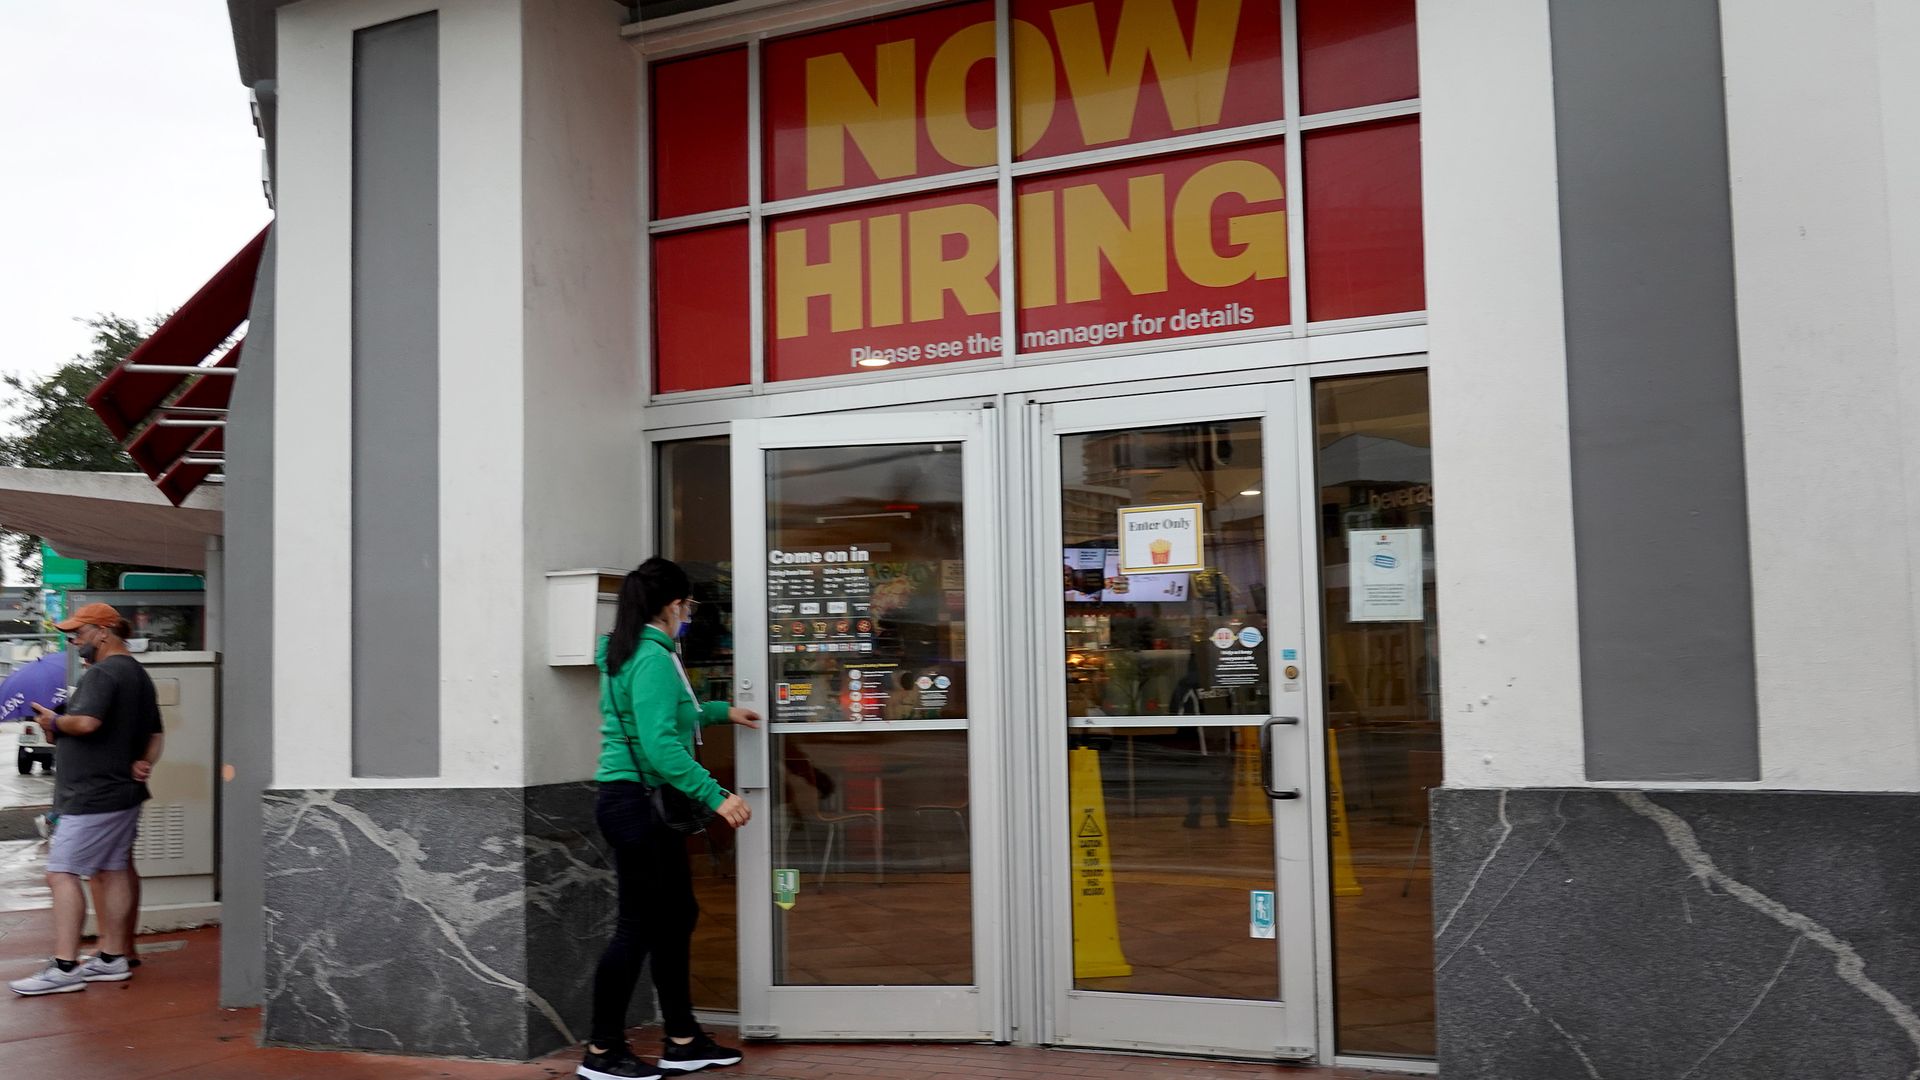 A ''Now Hiring" sign hangs above the entrance to a McDonald's restaurant on Novembe